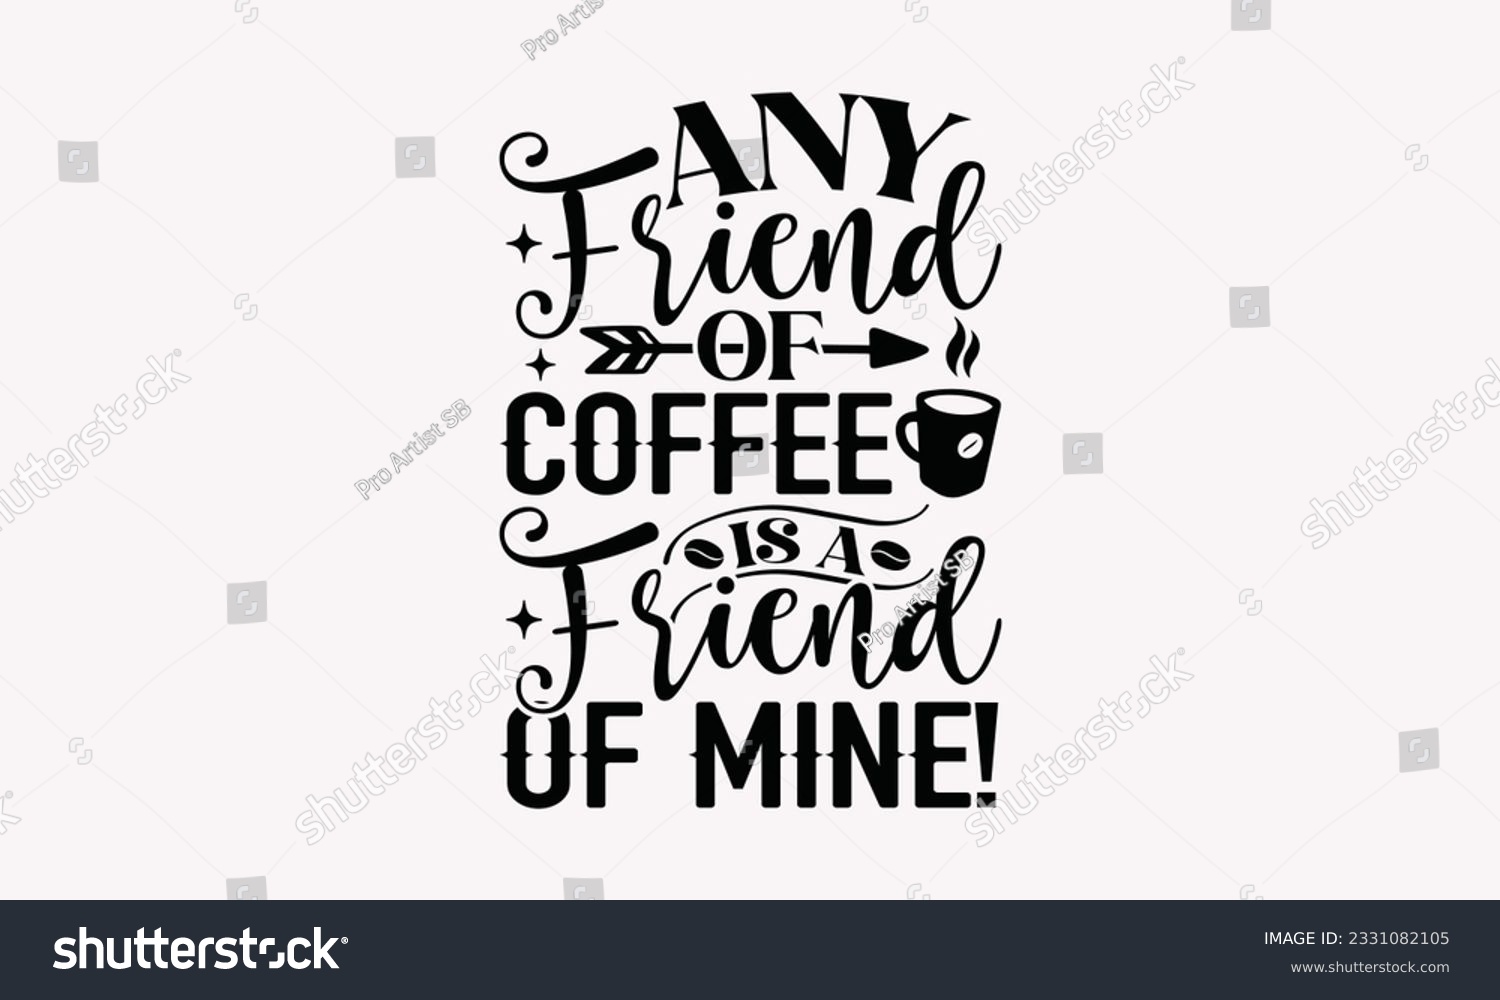 SVG of Any friend of coffee is a friend of mine! - Coffee SVG Design Template, Drink Quotes, Calligraphy graphic design, Typography poster with old style camera and quote. svg